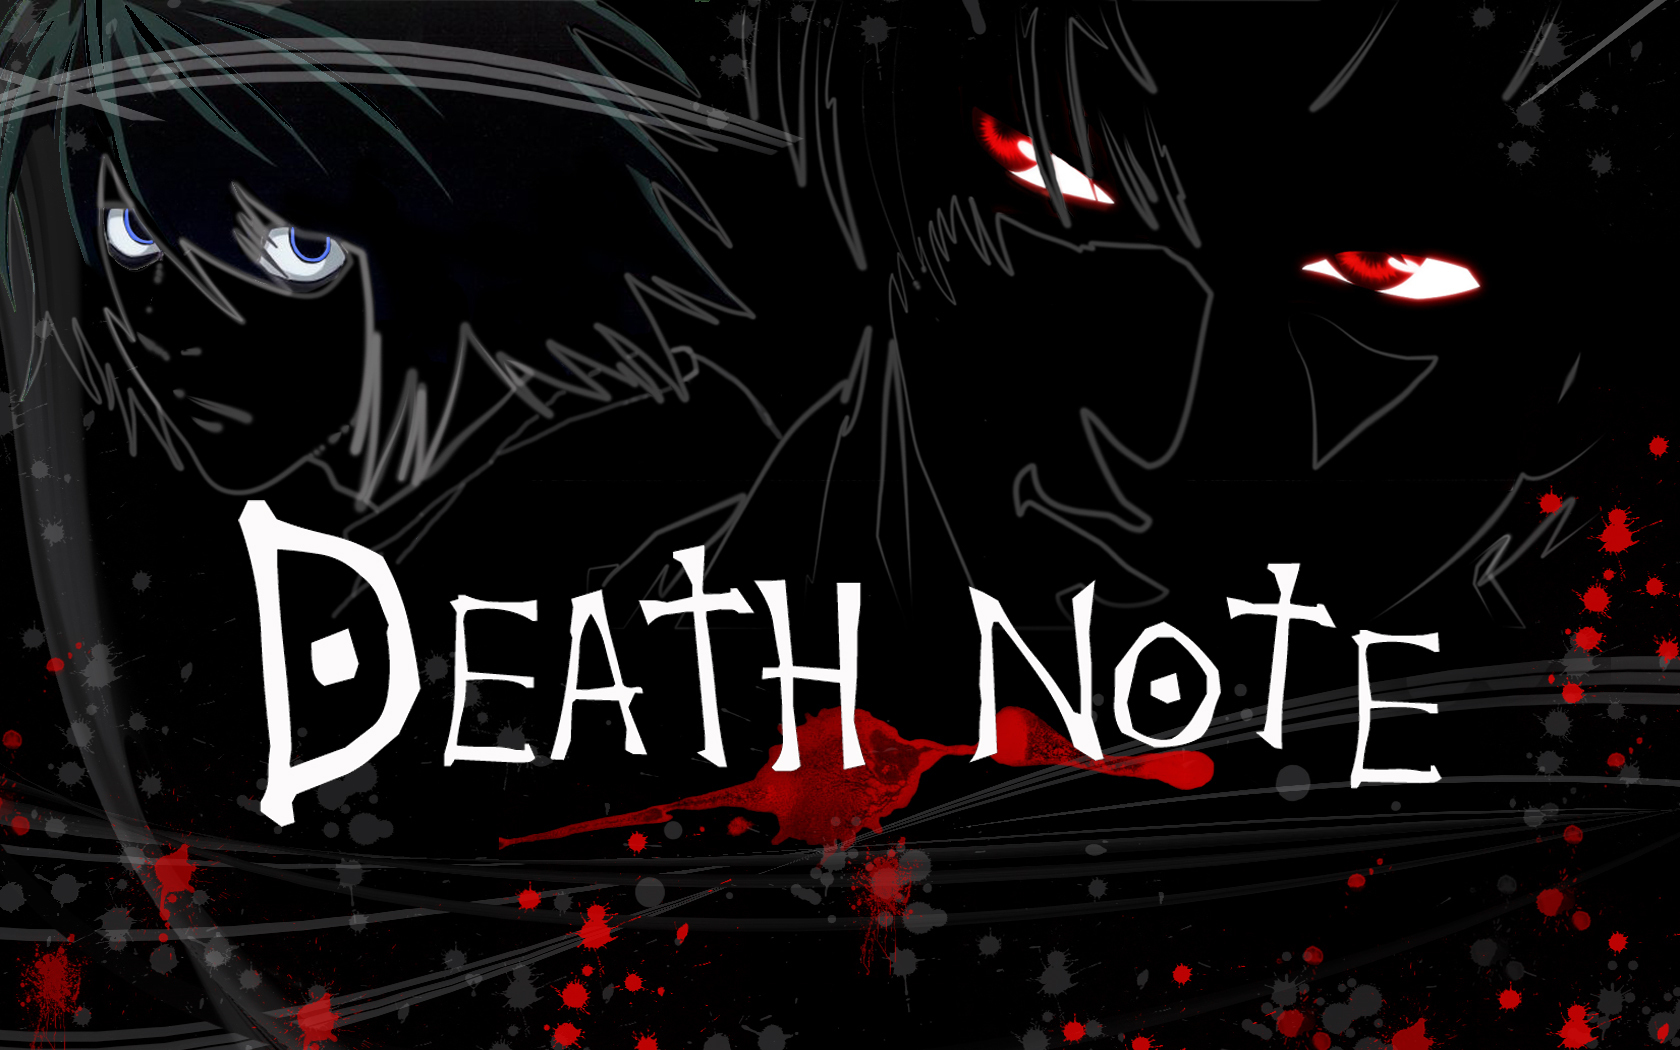 Classic Anime Series Death Note Posters | Anime Wall Sticker Death Note -  2023 New 29 - Aliexpress